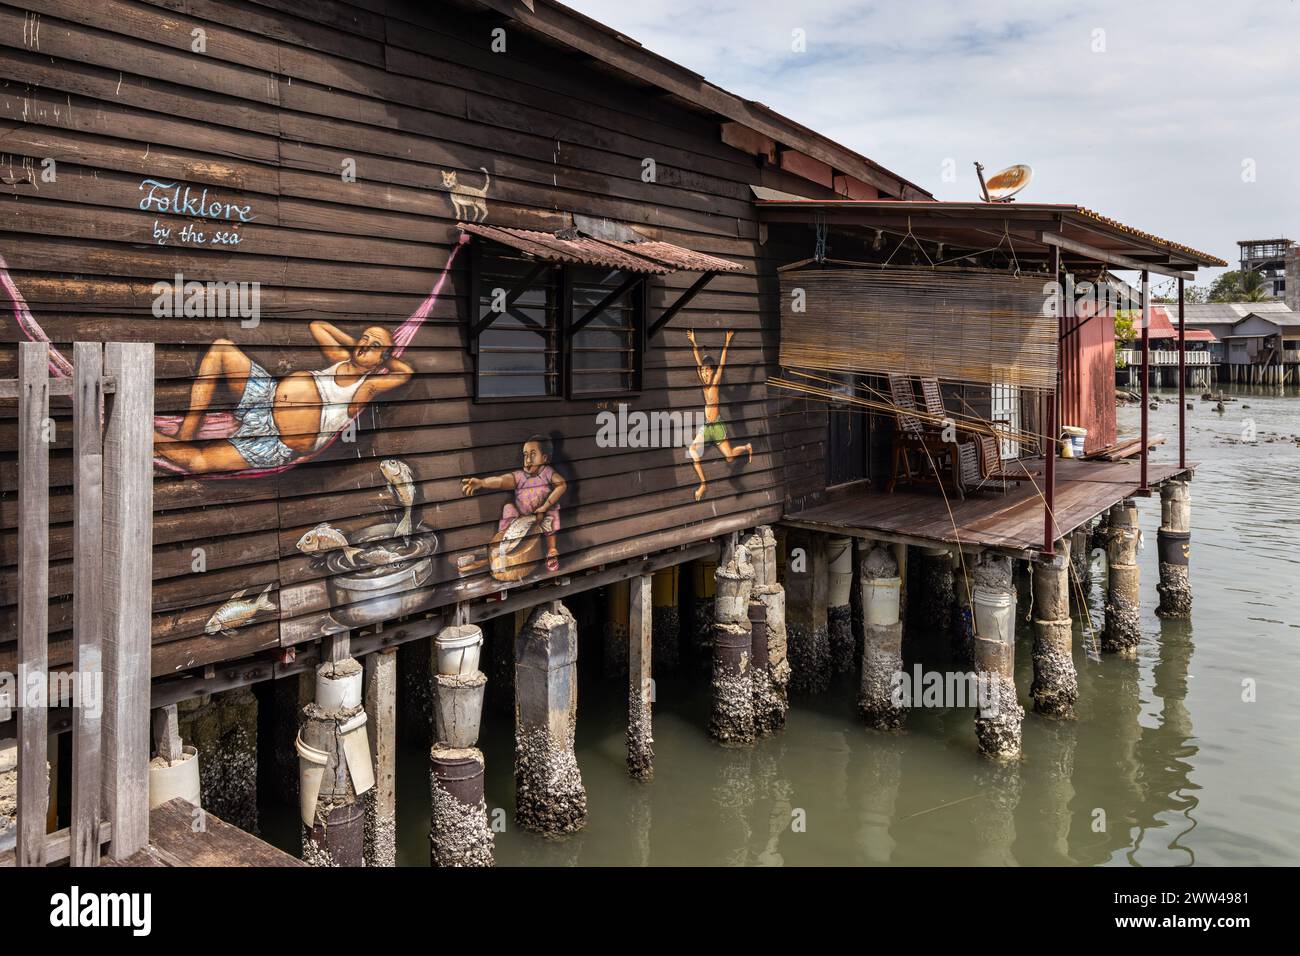 Folklore by the Sea Mural dell'artista singaporiano Yip Yew Chong - Street Art sul Chew Jetty a Georgetown, Penang, Malesia Foto Stock